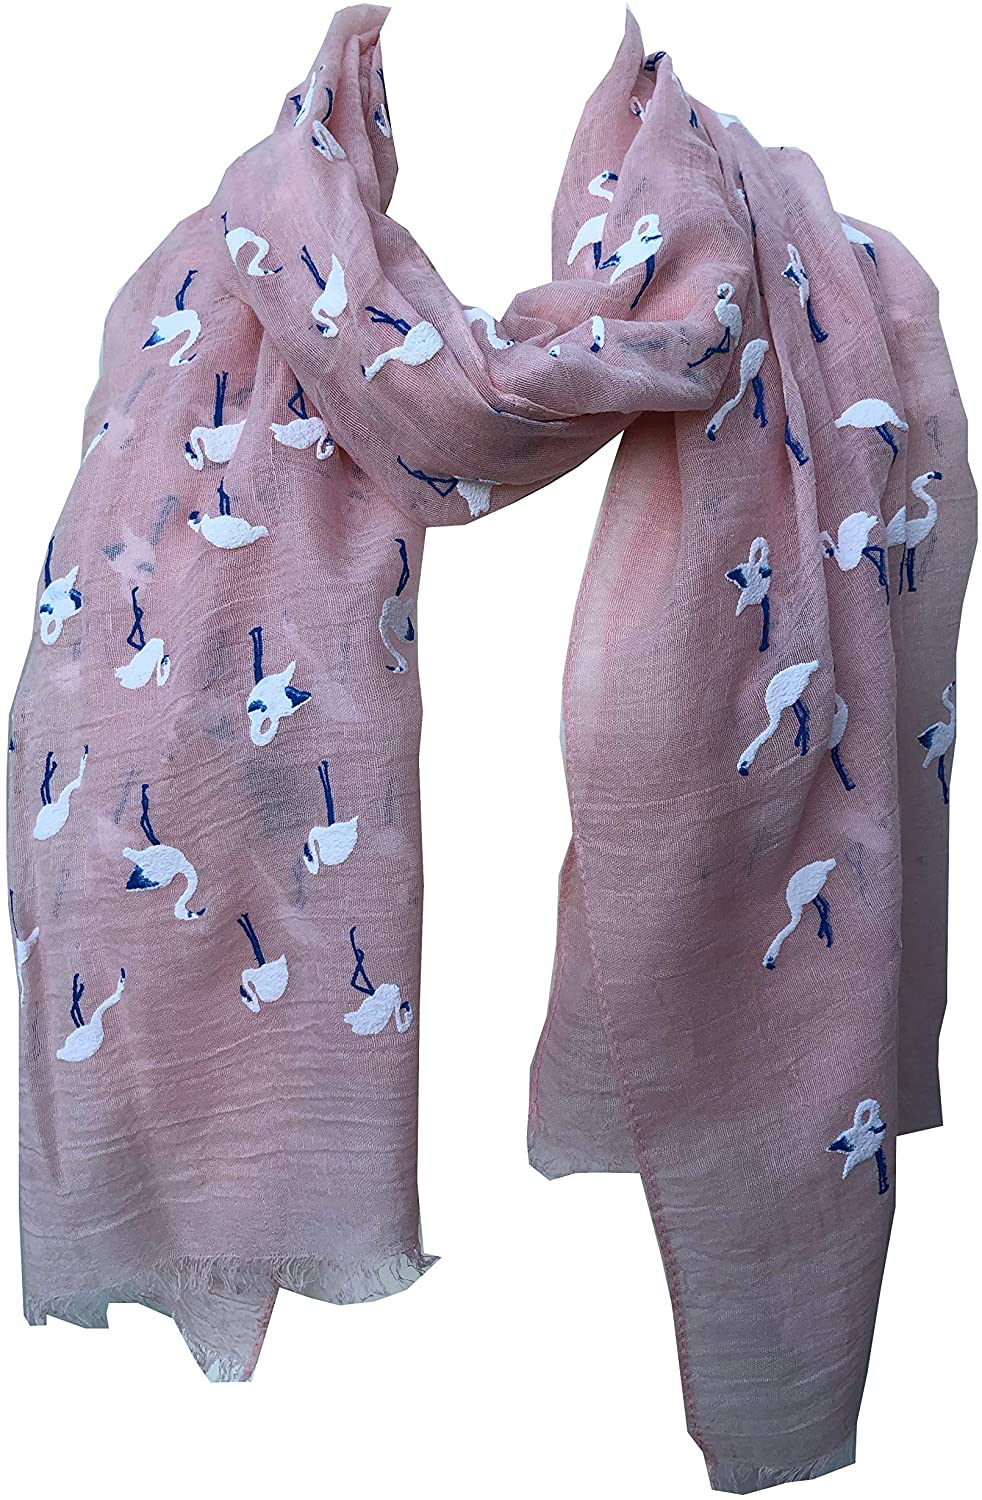 Pamper Yourself Now Peachy Pink with White Standing up Flamingo Long Scarf/wrap with Frayed Edge